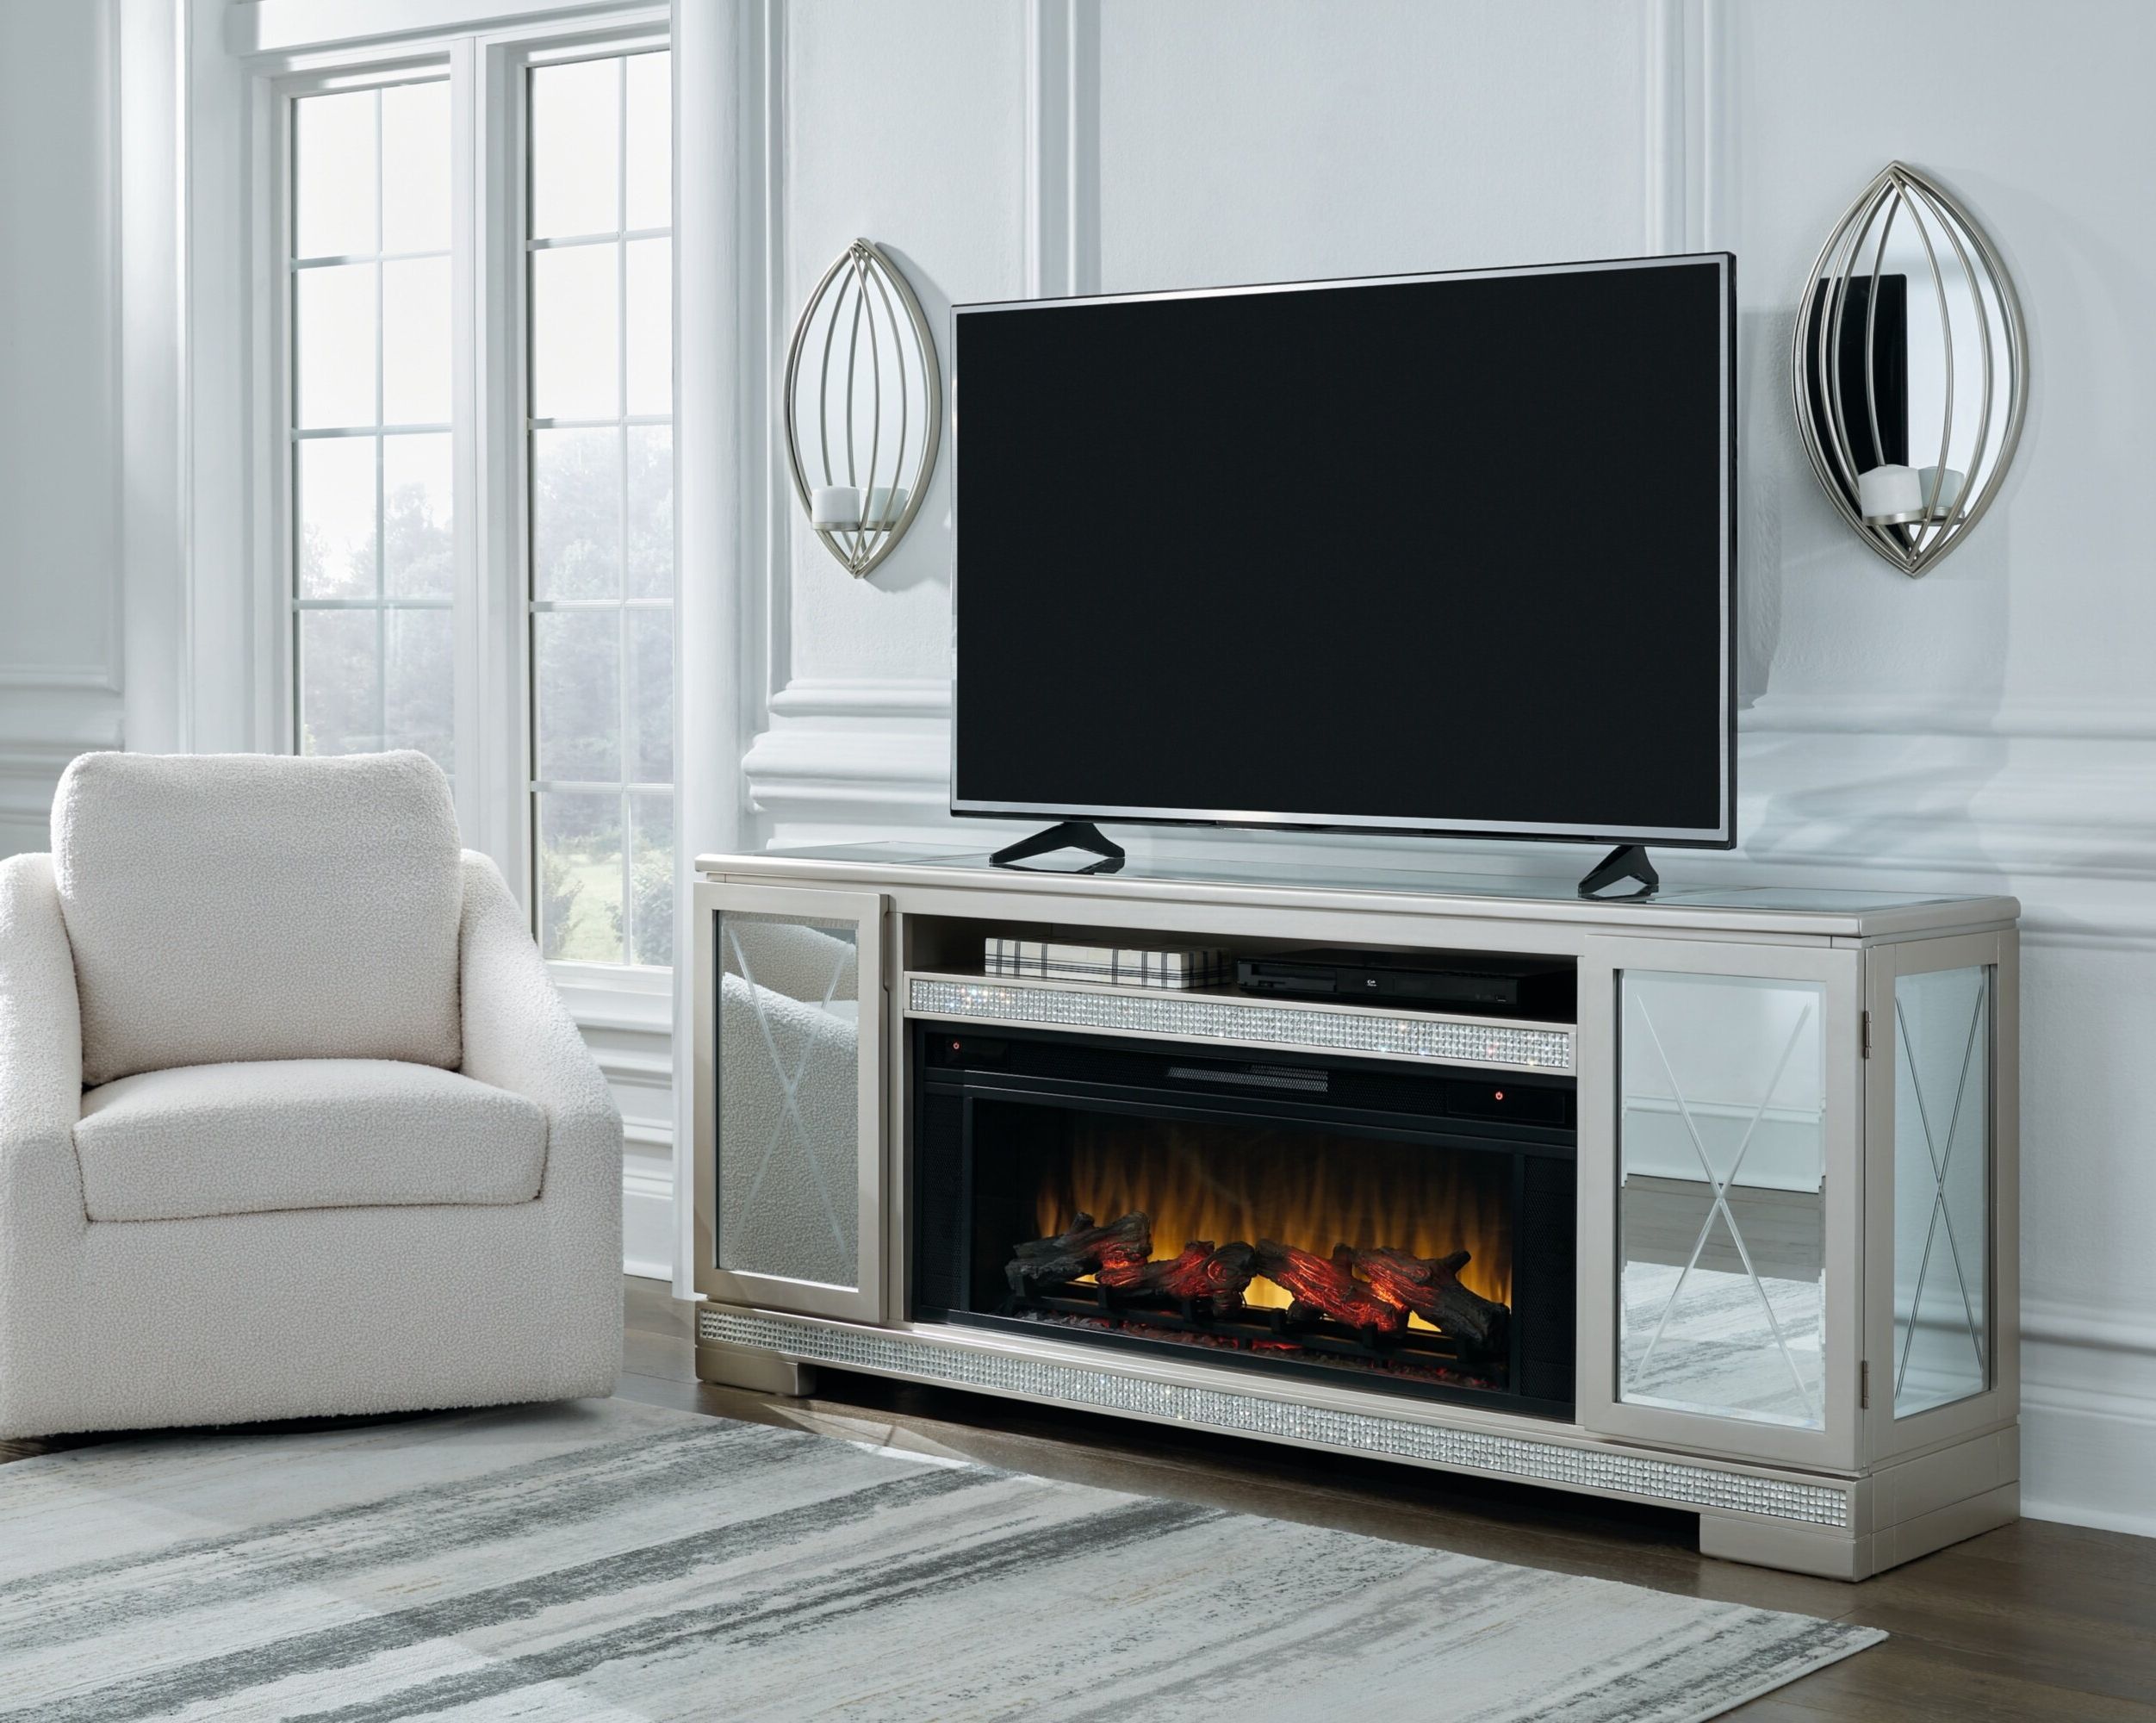 Signature Designashley Flamory Tv Stand For Tvs Up To 70" With Electric  Fireplace Included | Wayfair Within Electric Fireplace Tv Stands (Gallery 16 of 20)